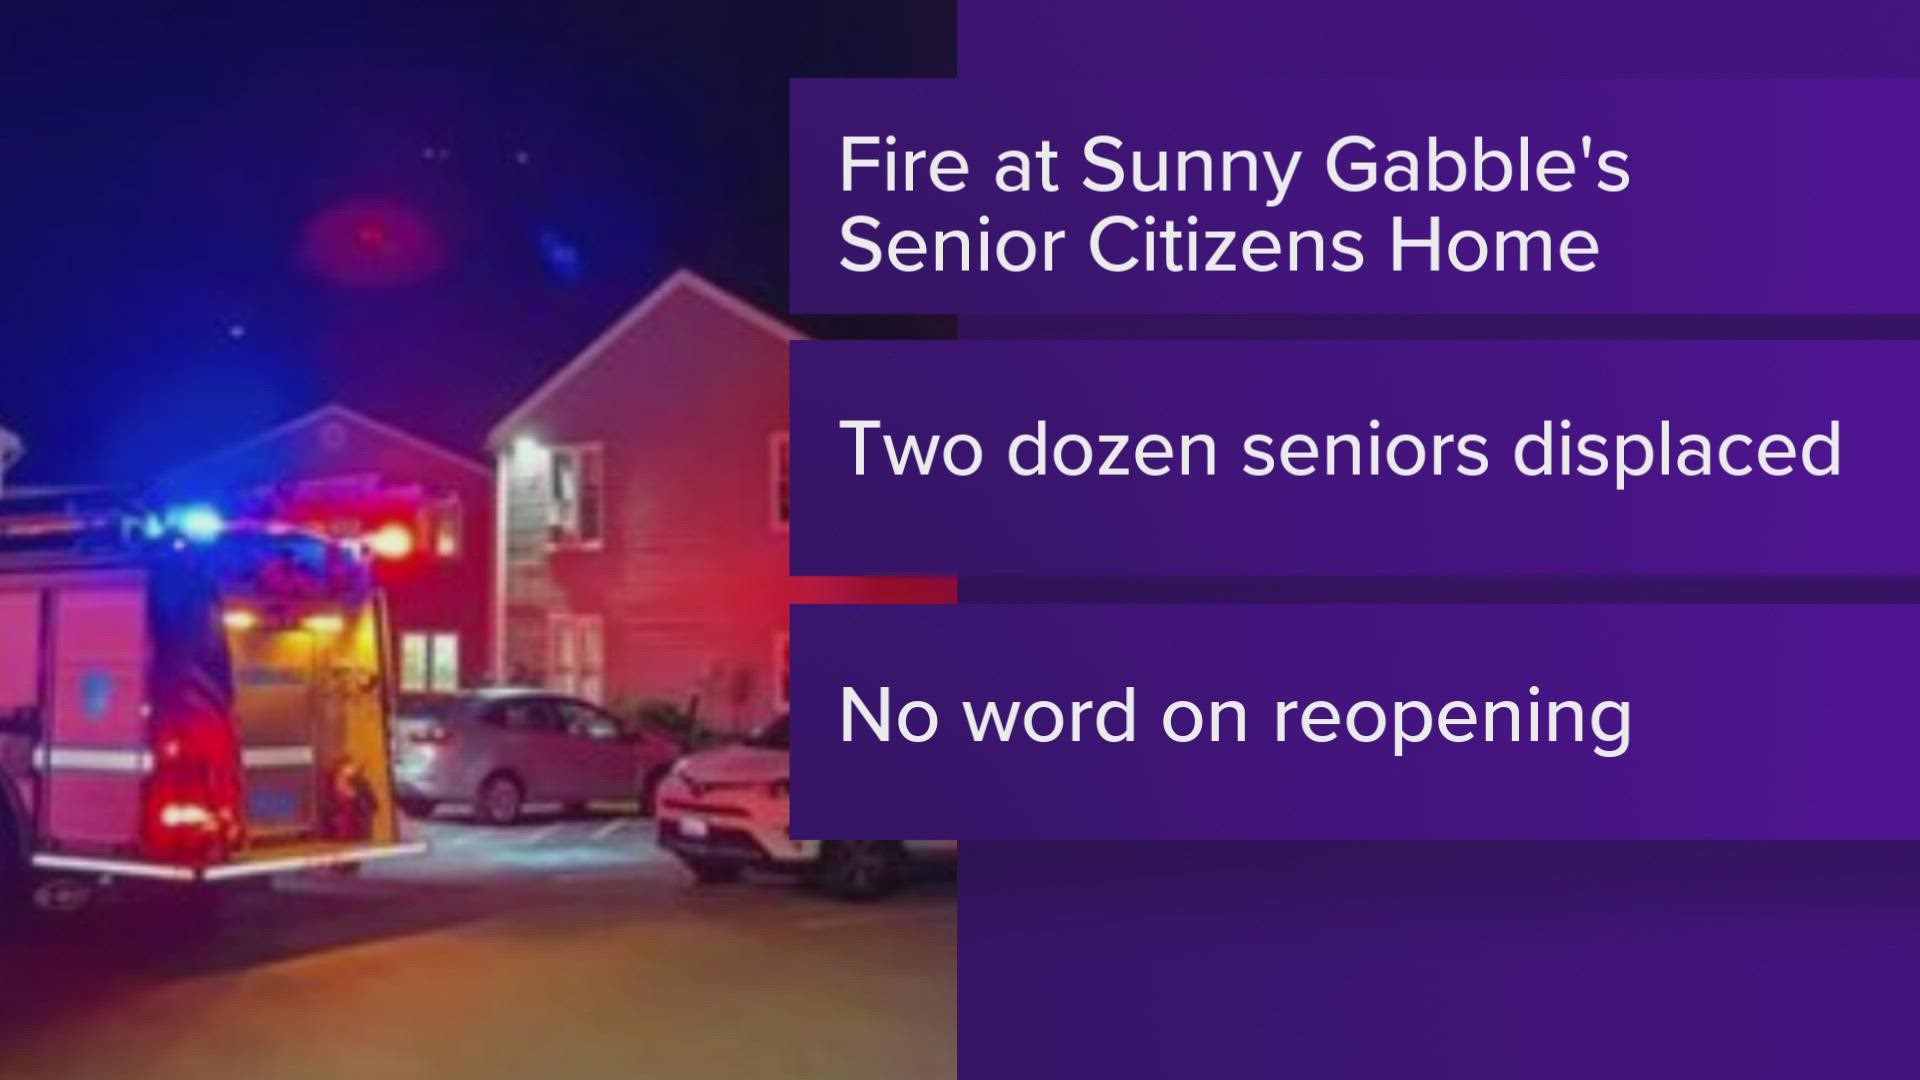 About two dozen seniors were displaced after a fire at Sunny Gables Senior Citizens Home in Glenburn Friday night.